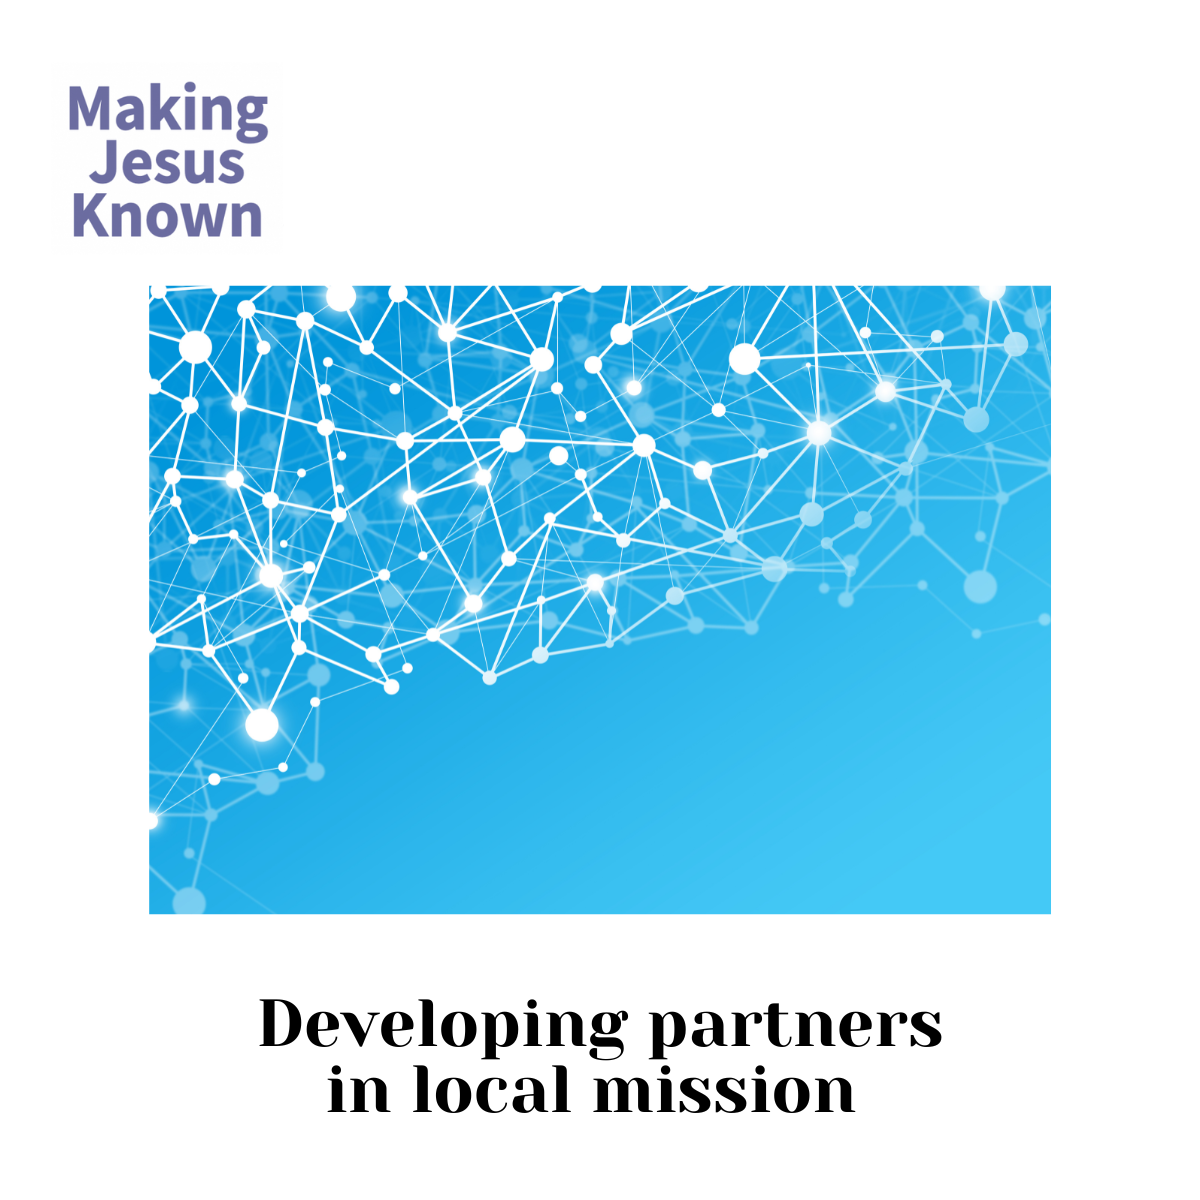 Developing partners in local mission